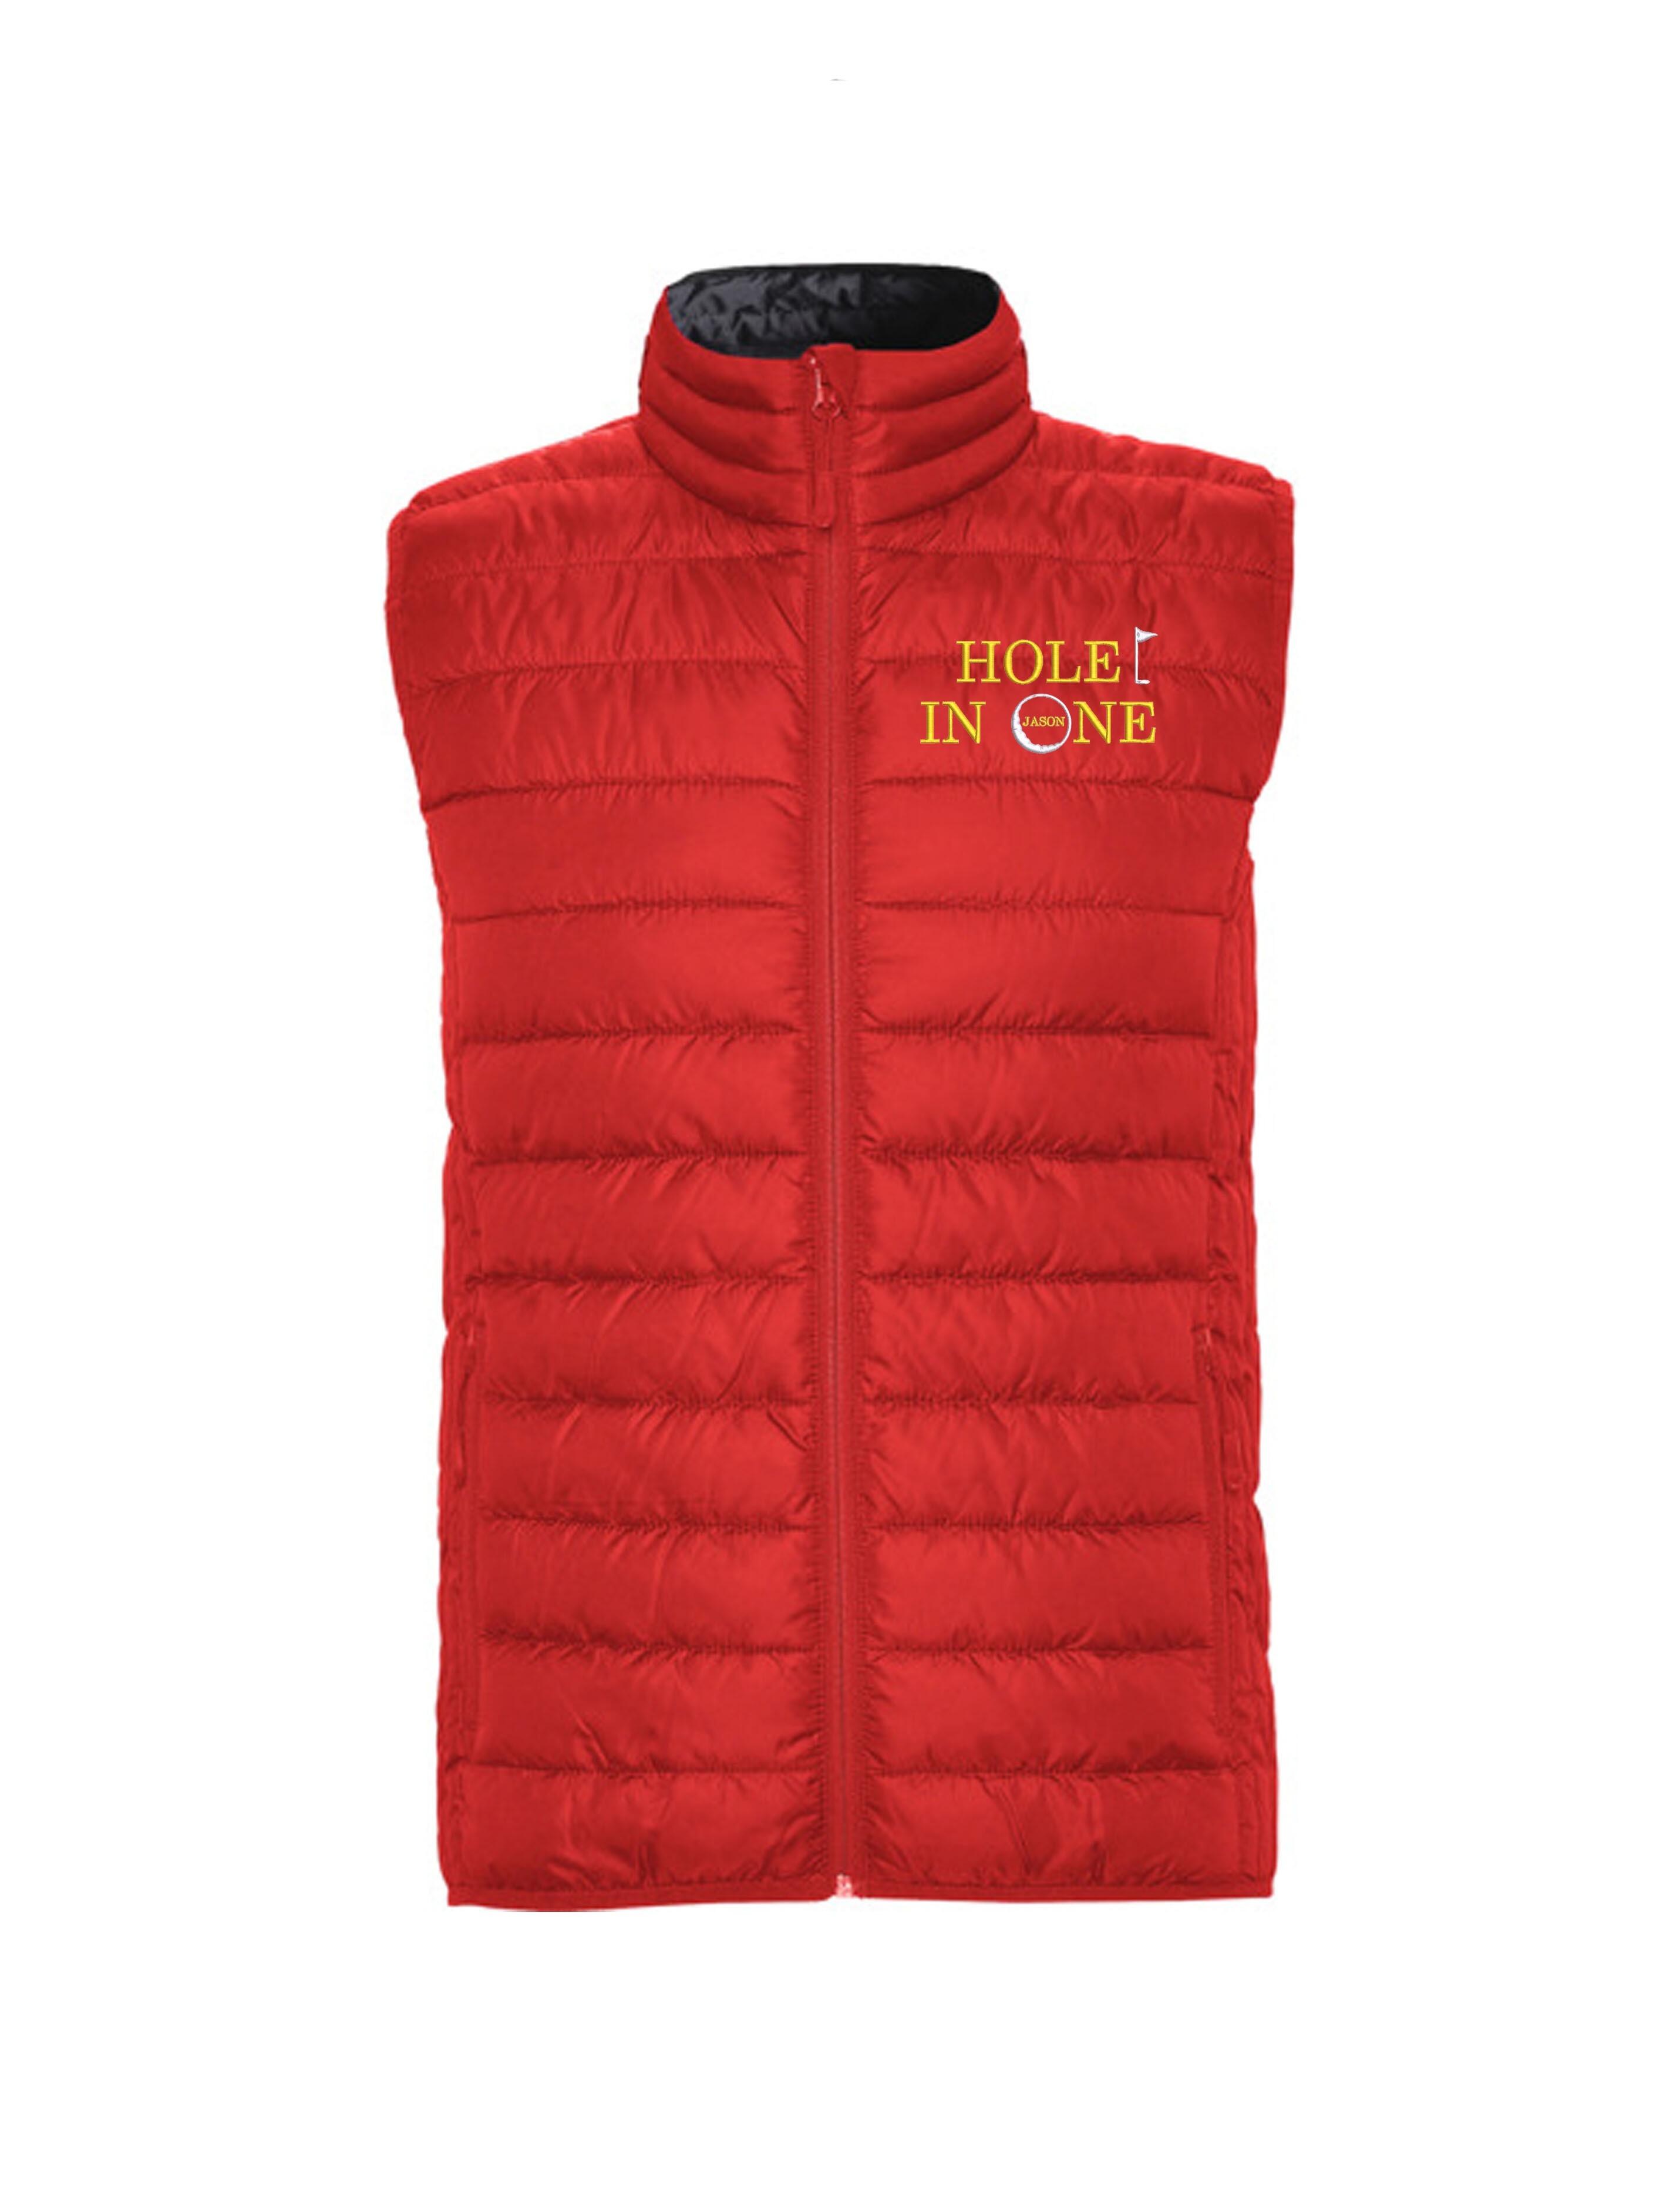 Hole in 1 Design Embroidered Feather Golf Gilet Red